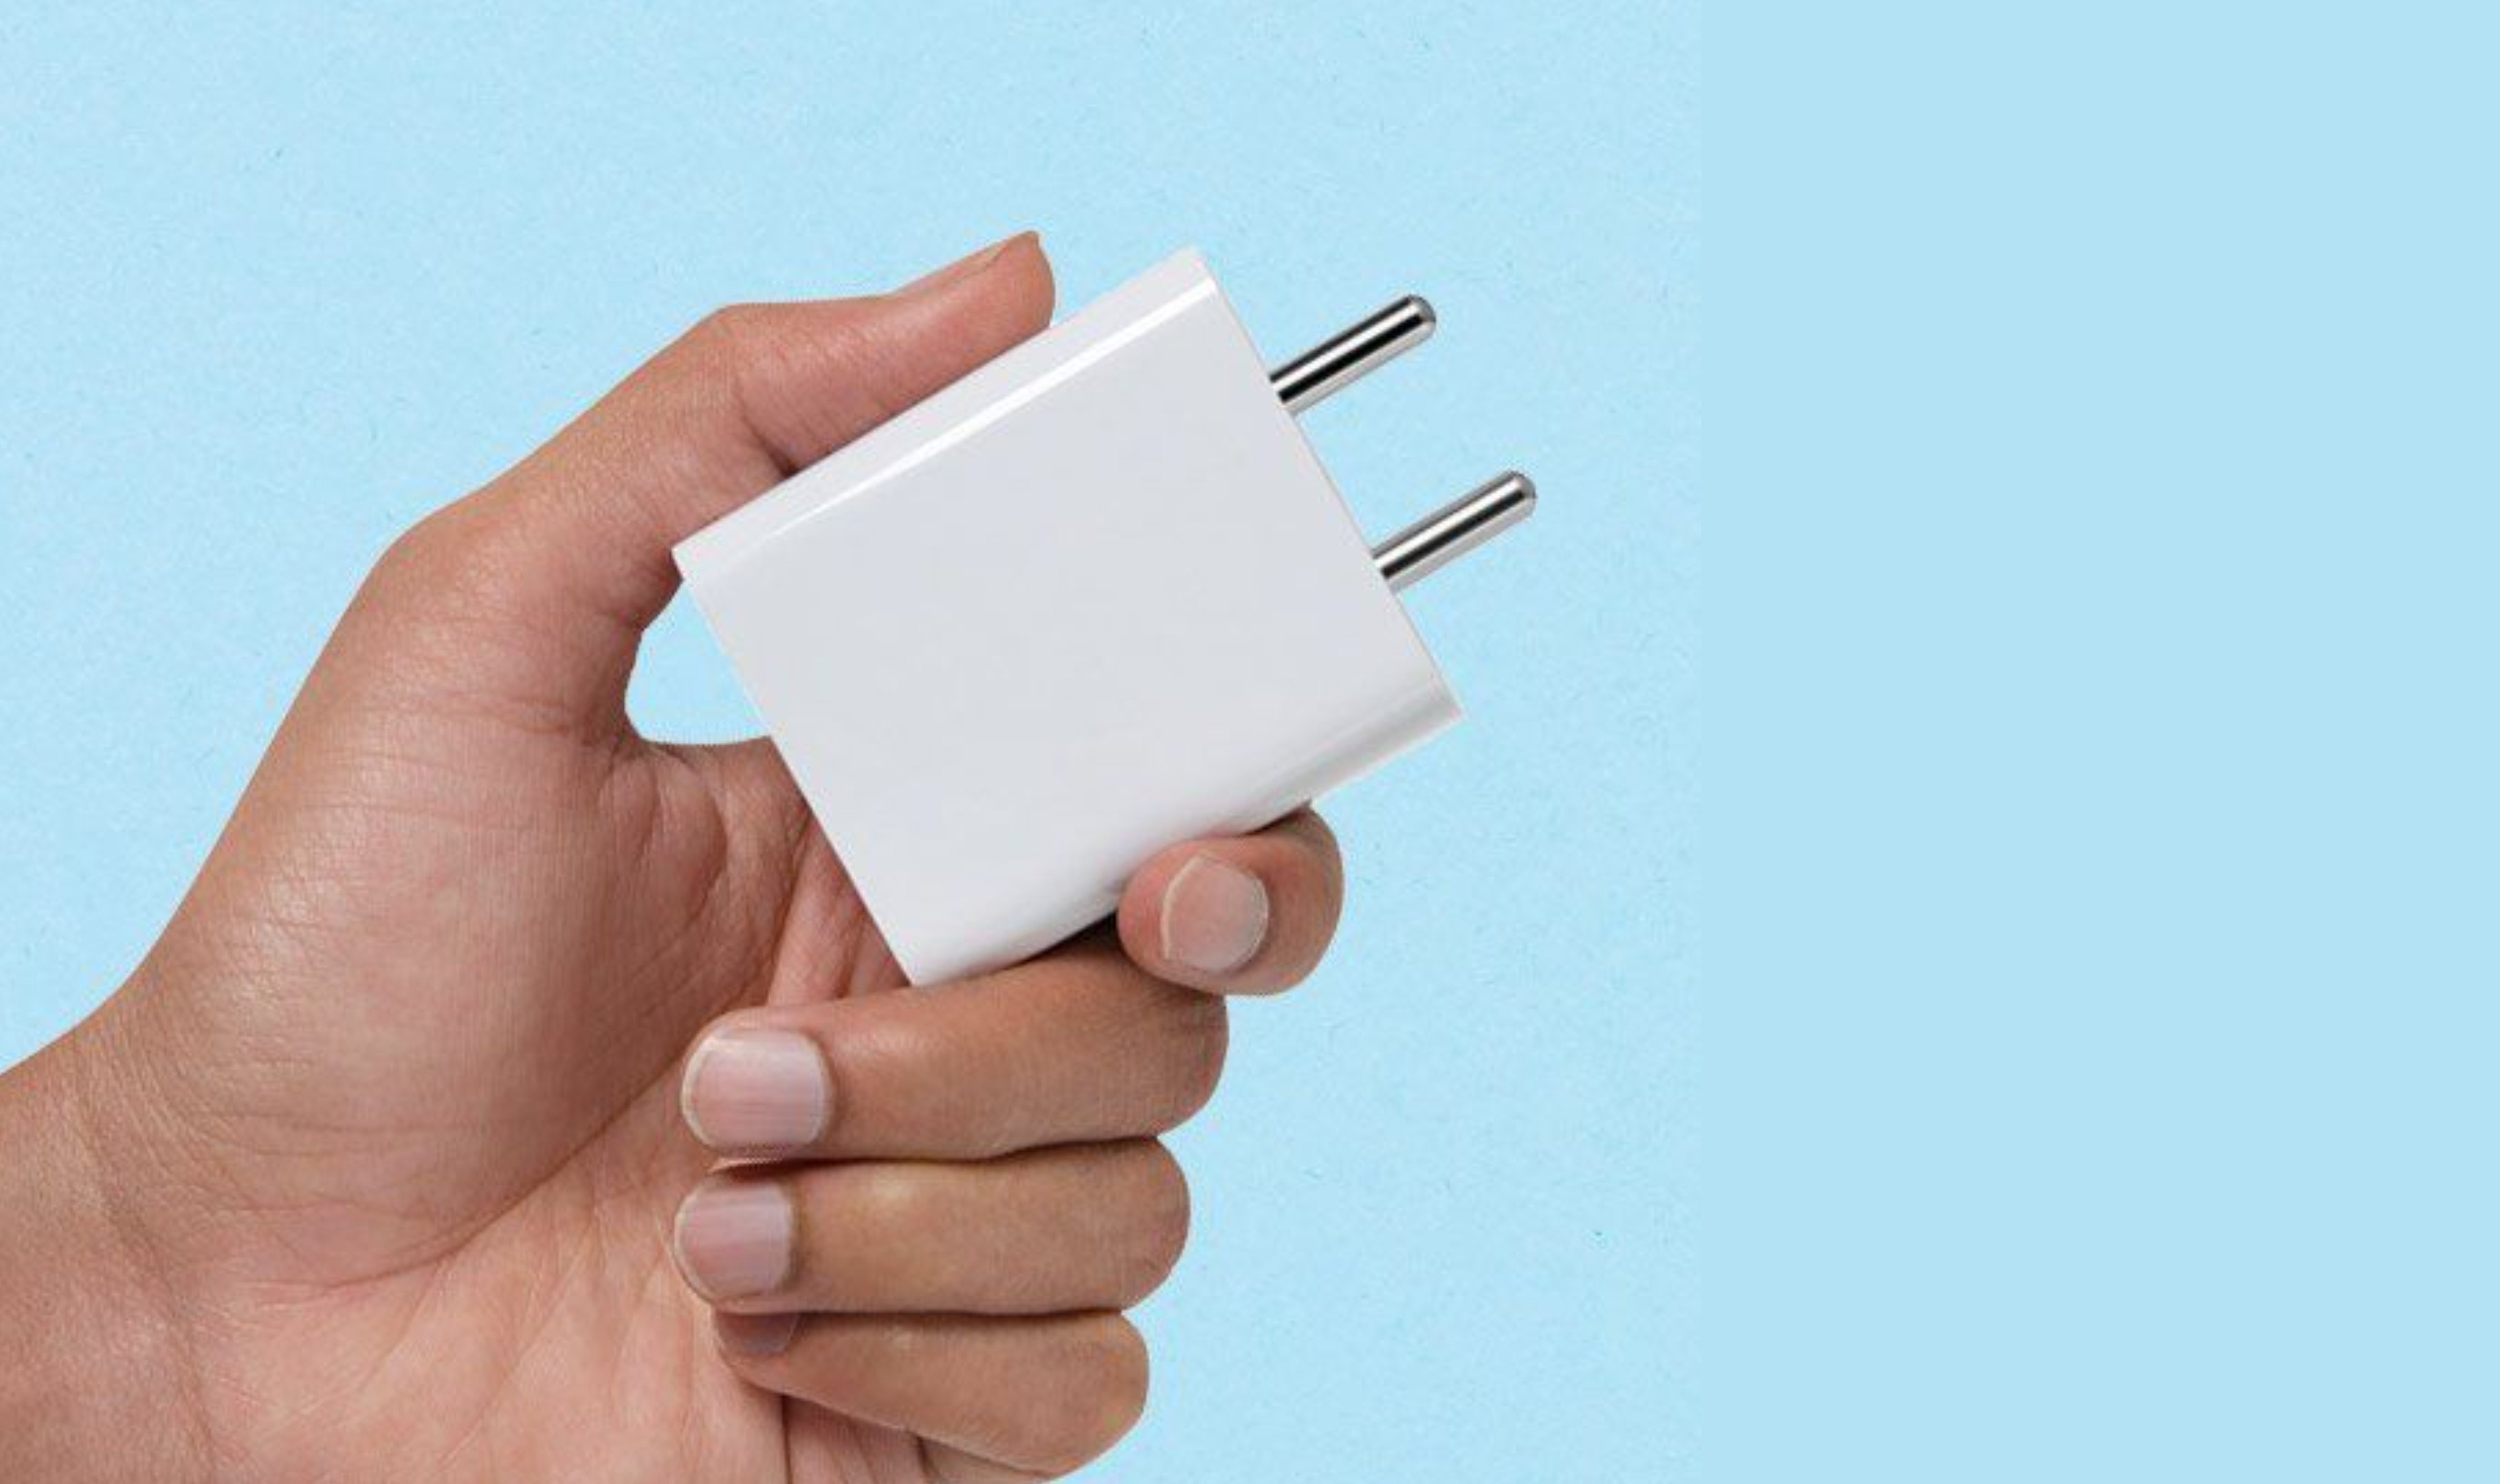 Xiaomi Mi 33W SonicCharge 2.0 Charger